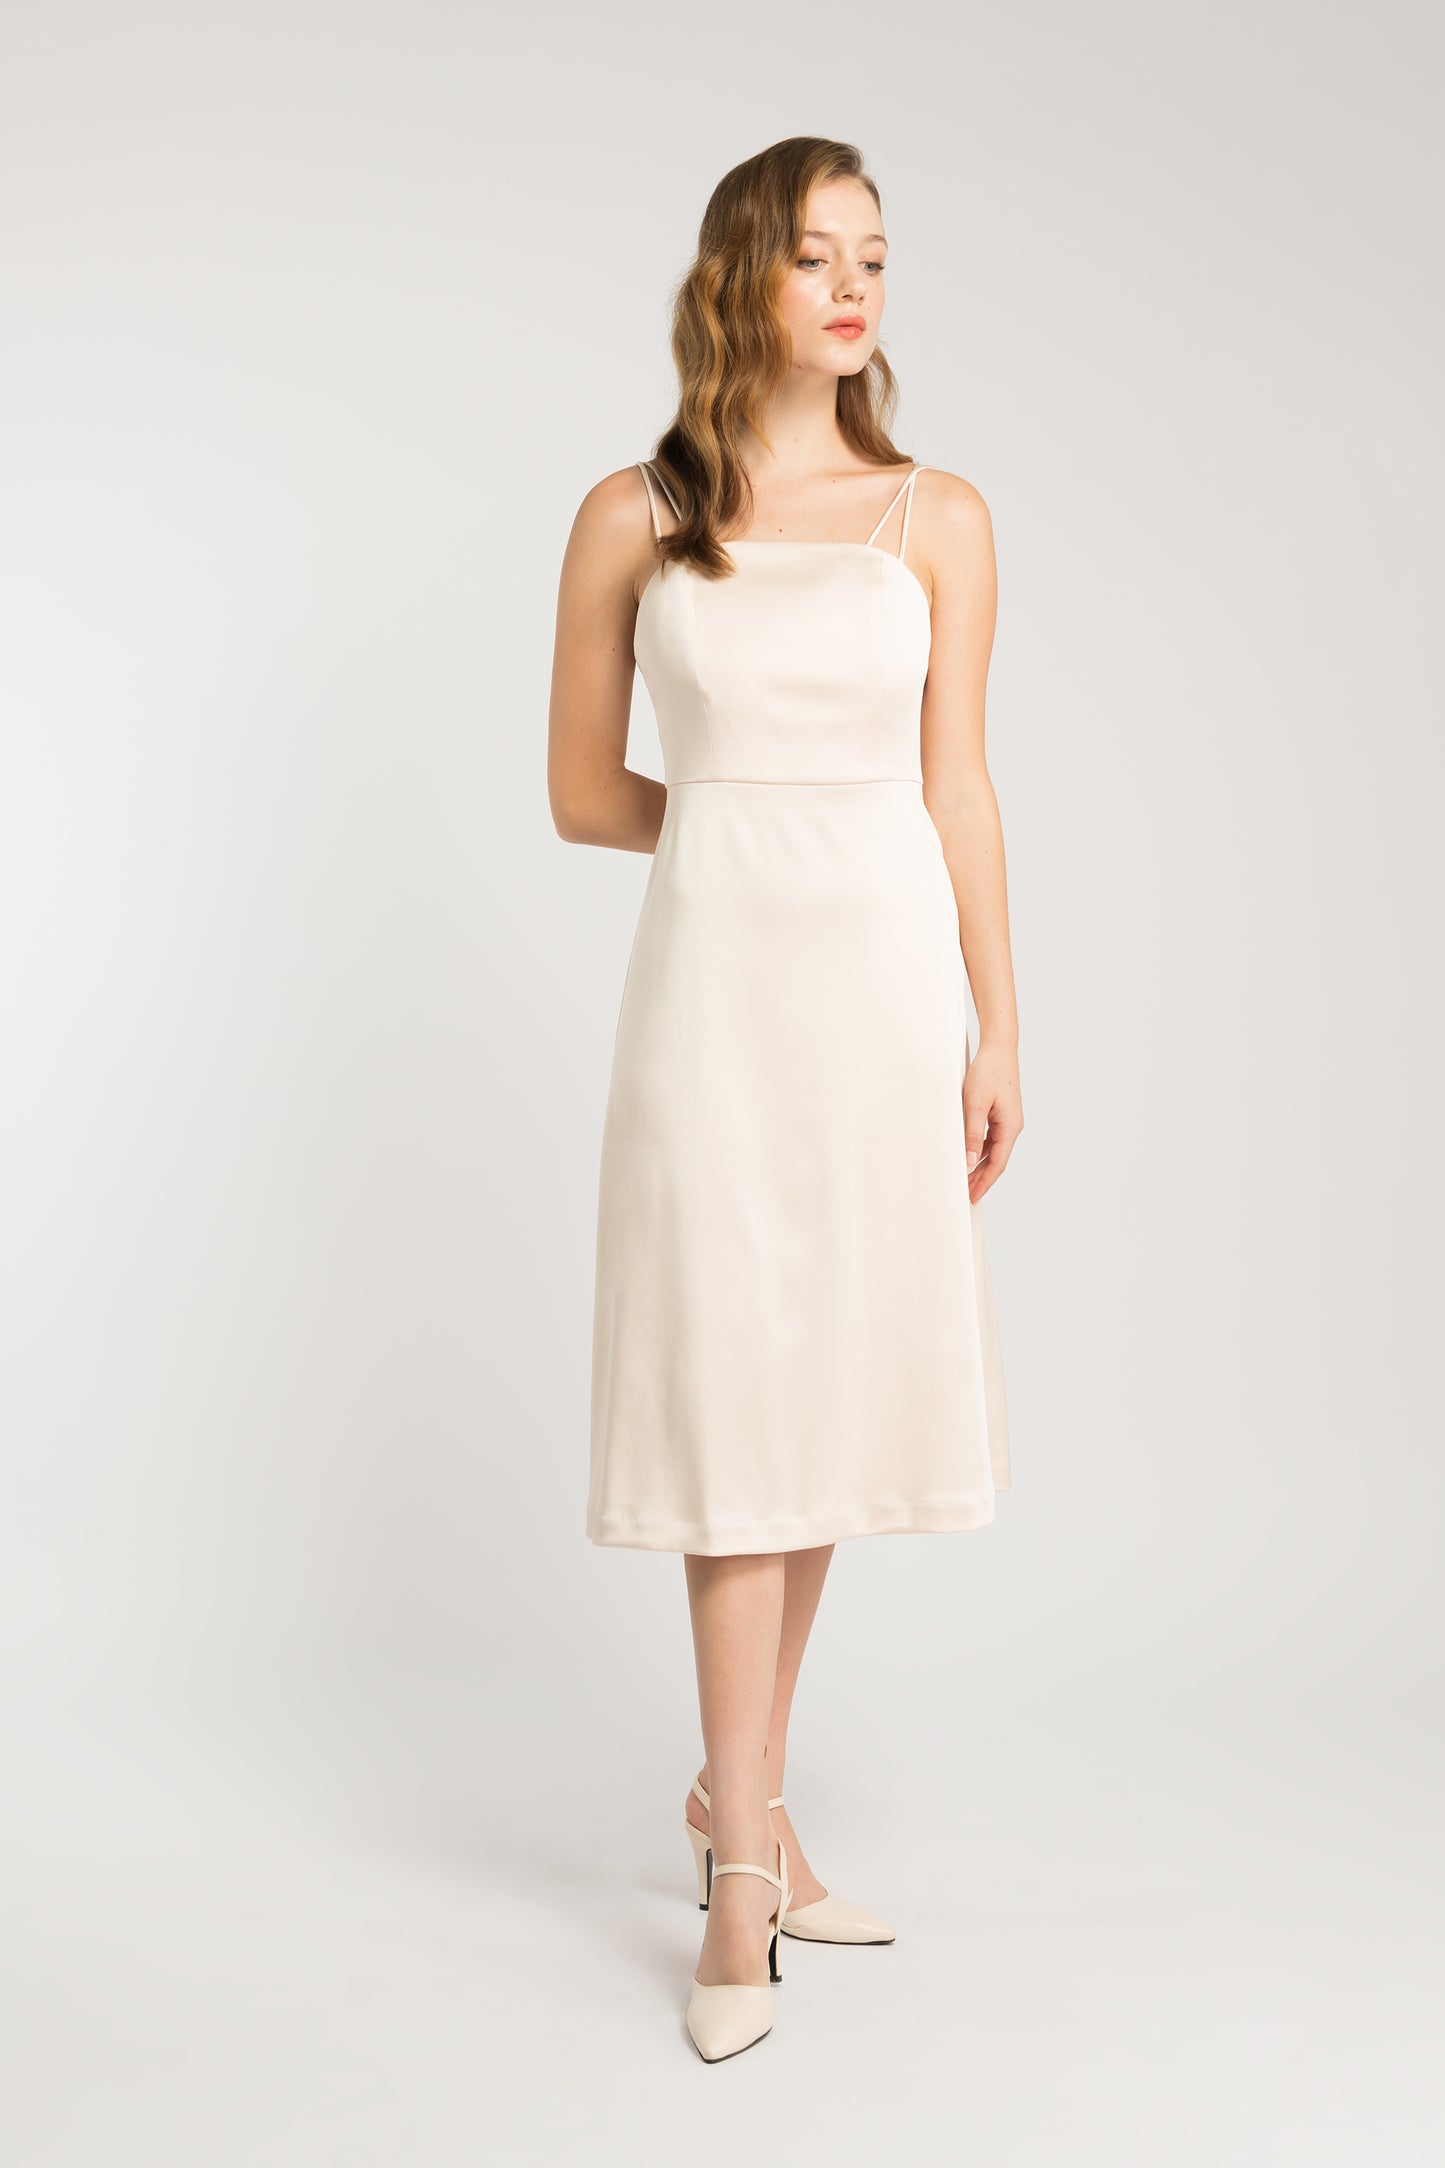 Strappy Cocktail Dress - Champagne